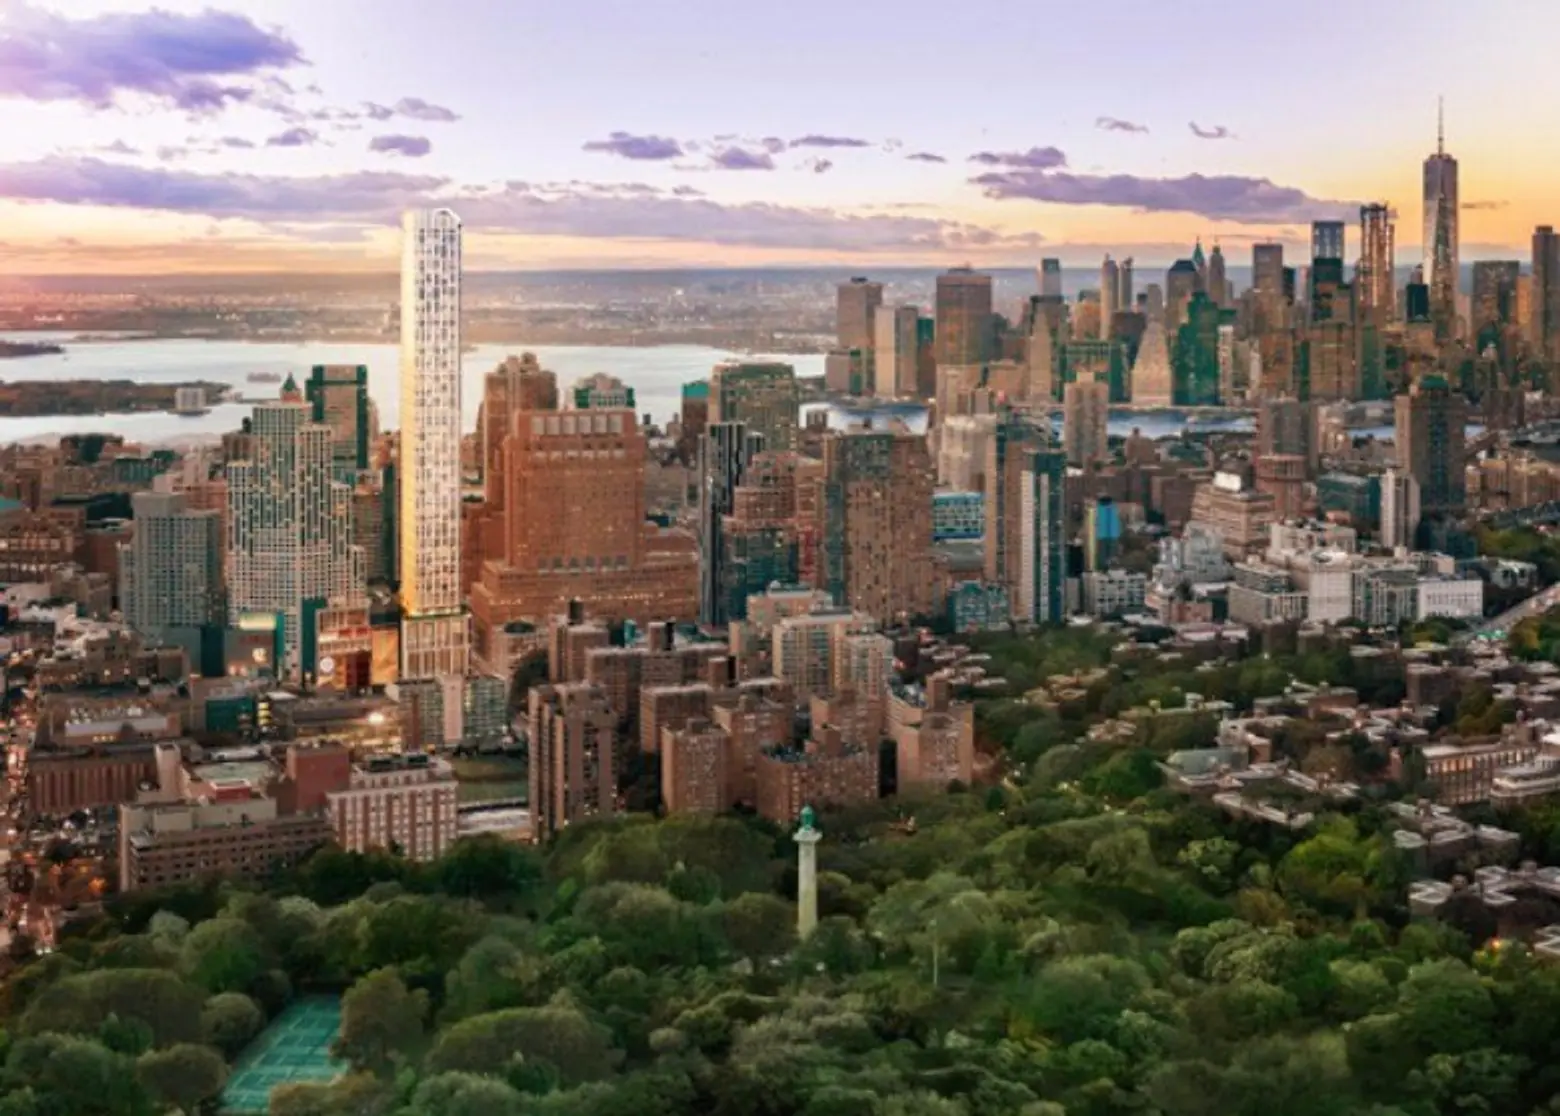 Brooklyn Point, Extell Development’s first tower in the borough, will rise 720 feet